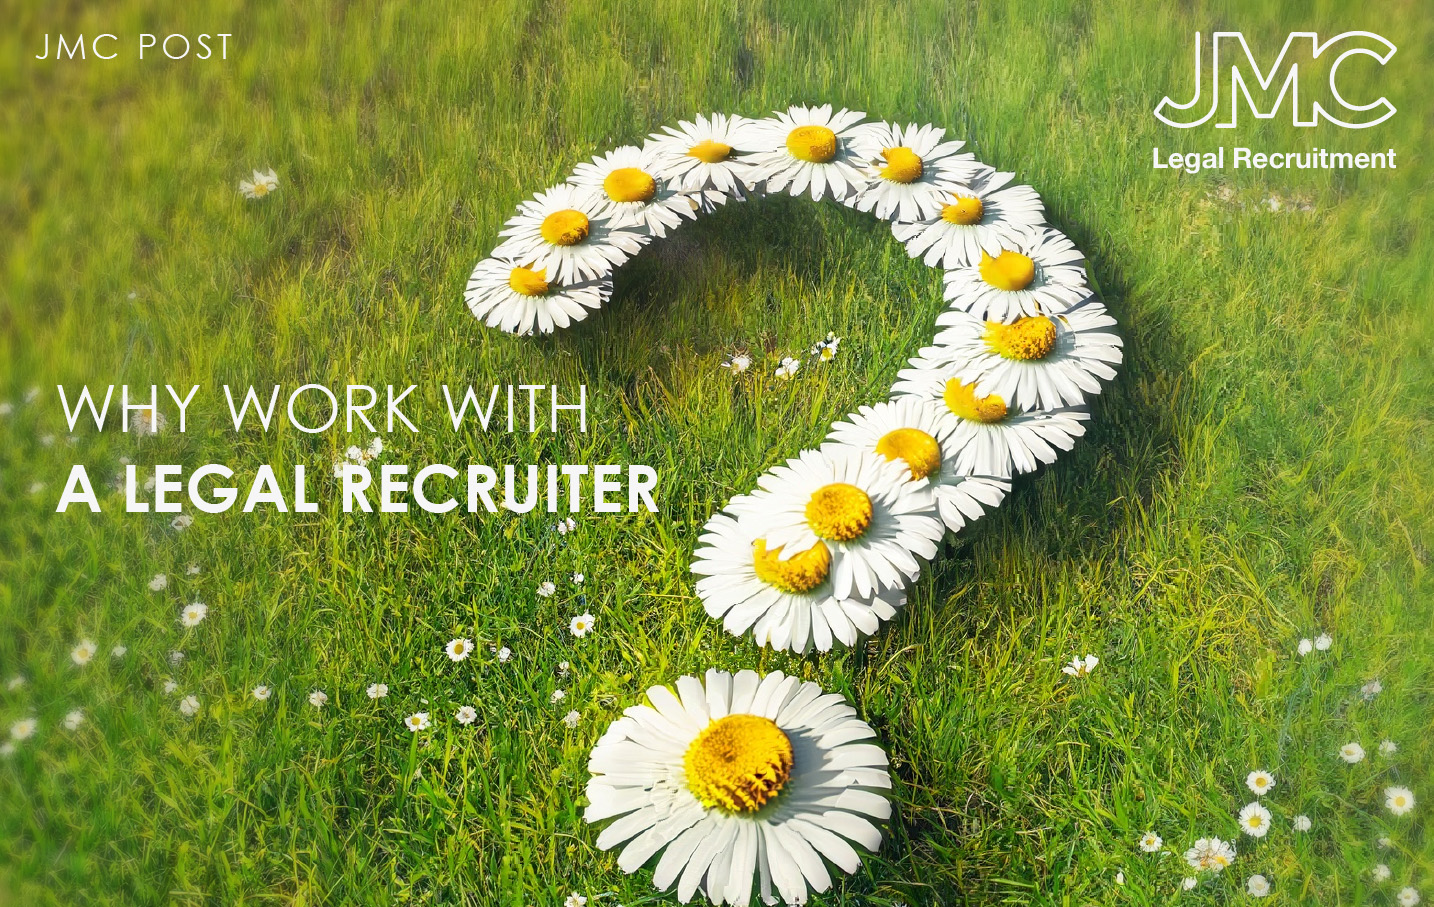 Why work with a Legal Recruiter?